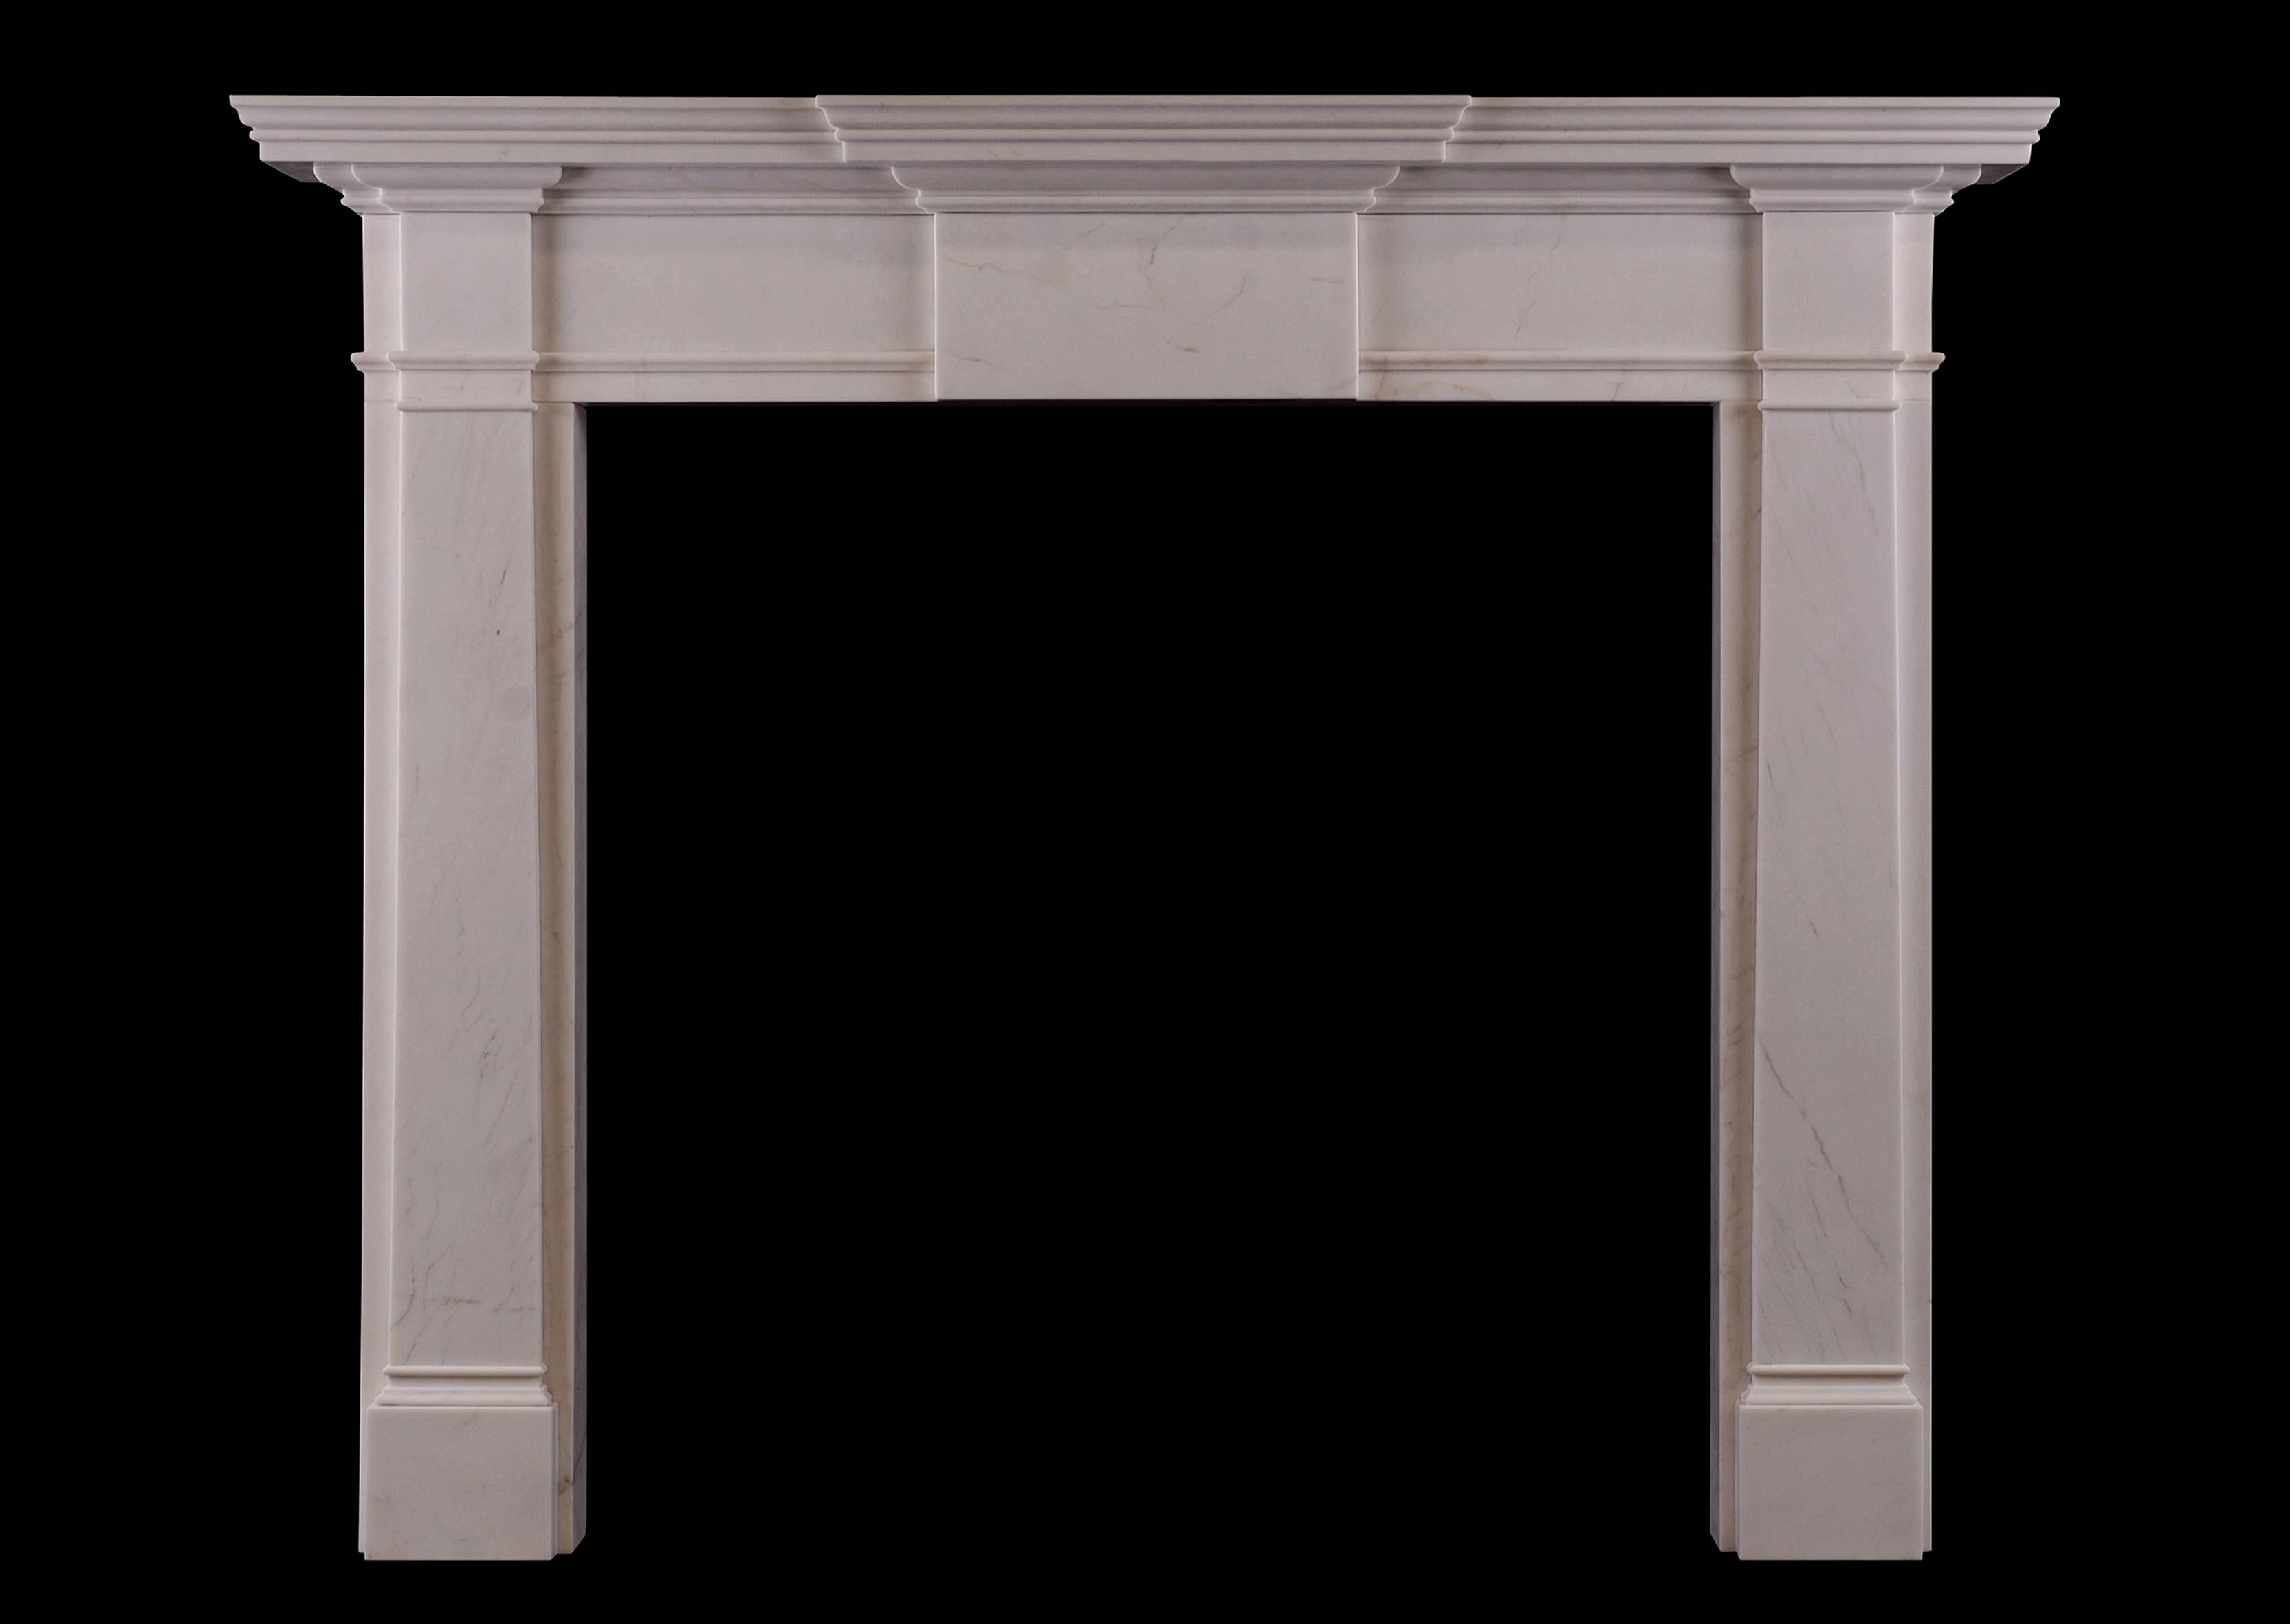 A mid-sized English Georgian style fireplace. The plain jambs surmounted by scotia moulding and plain end blocks. The frieze with plain centre panel with moulded shelf above. An attractively simple model in the classical style. Modern. (Smaller